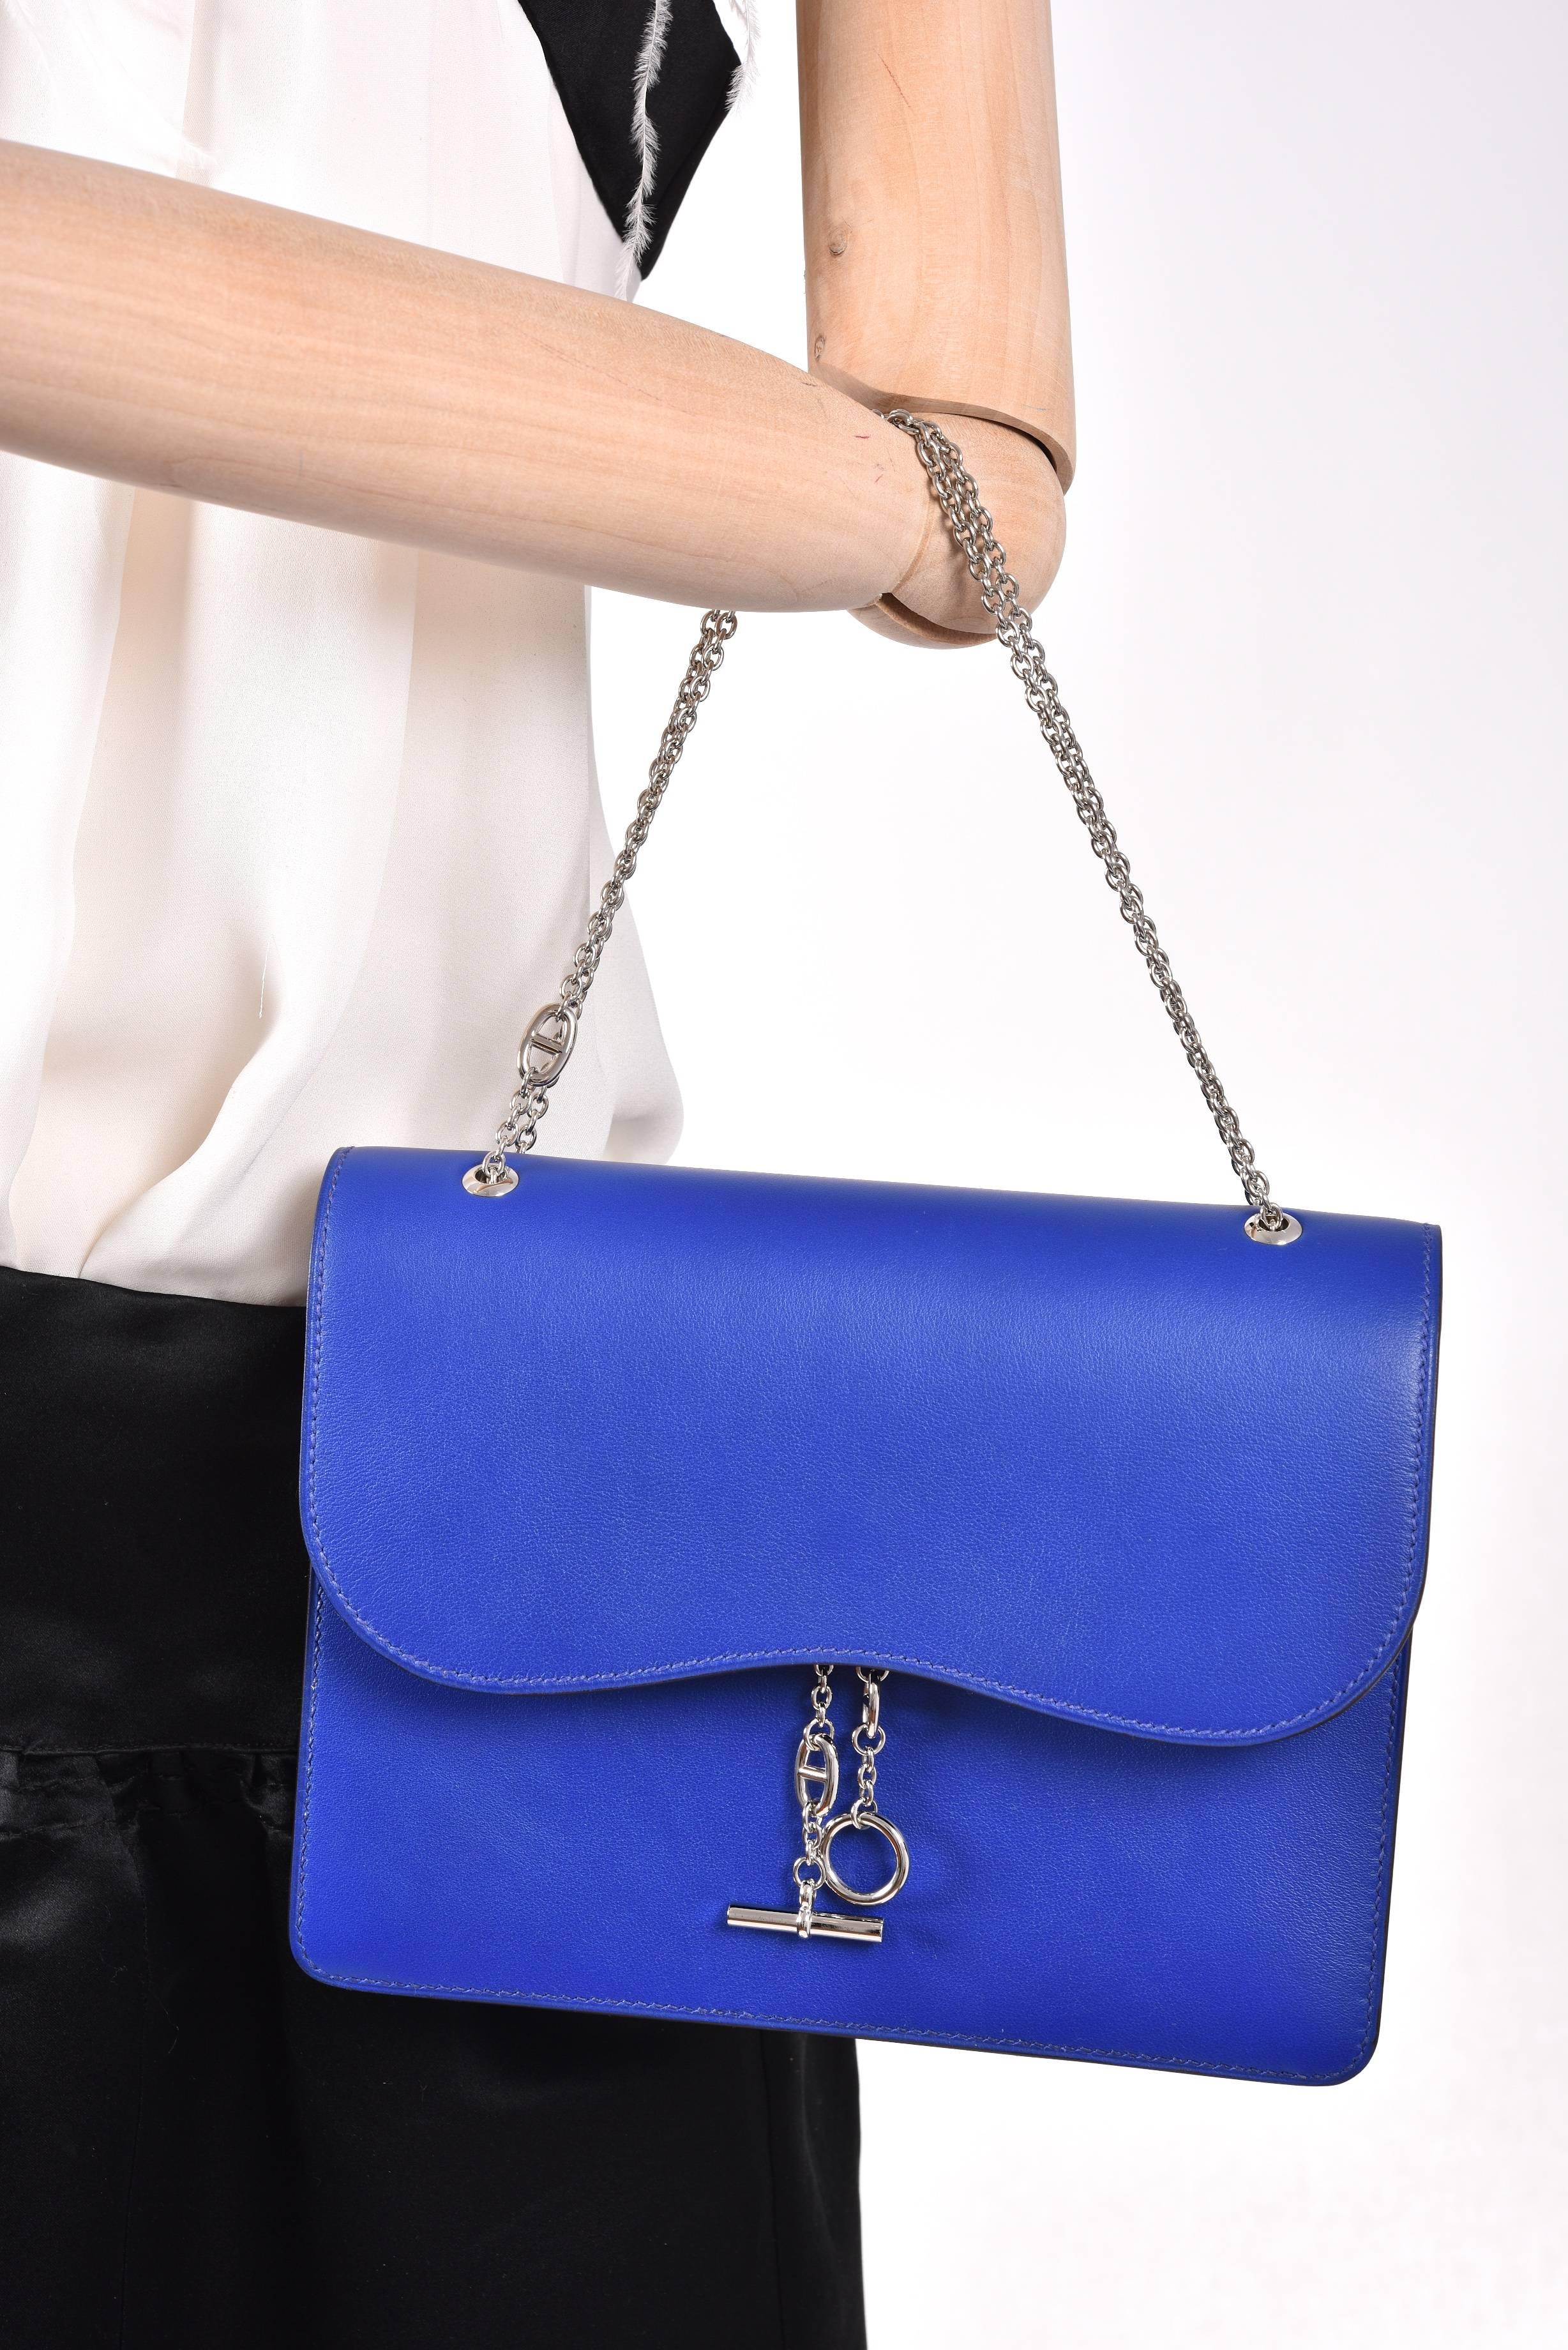 Women's or Men's Hermes Catenina Bag Clutch Blue Electric Gorgeous New Bag! JaneFinds